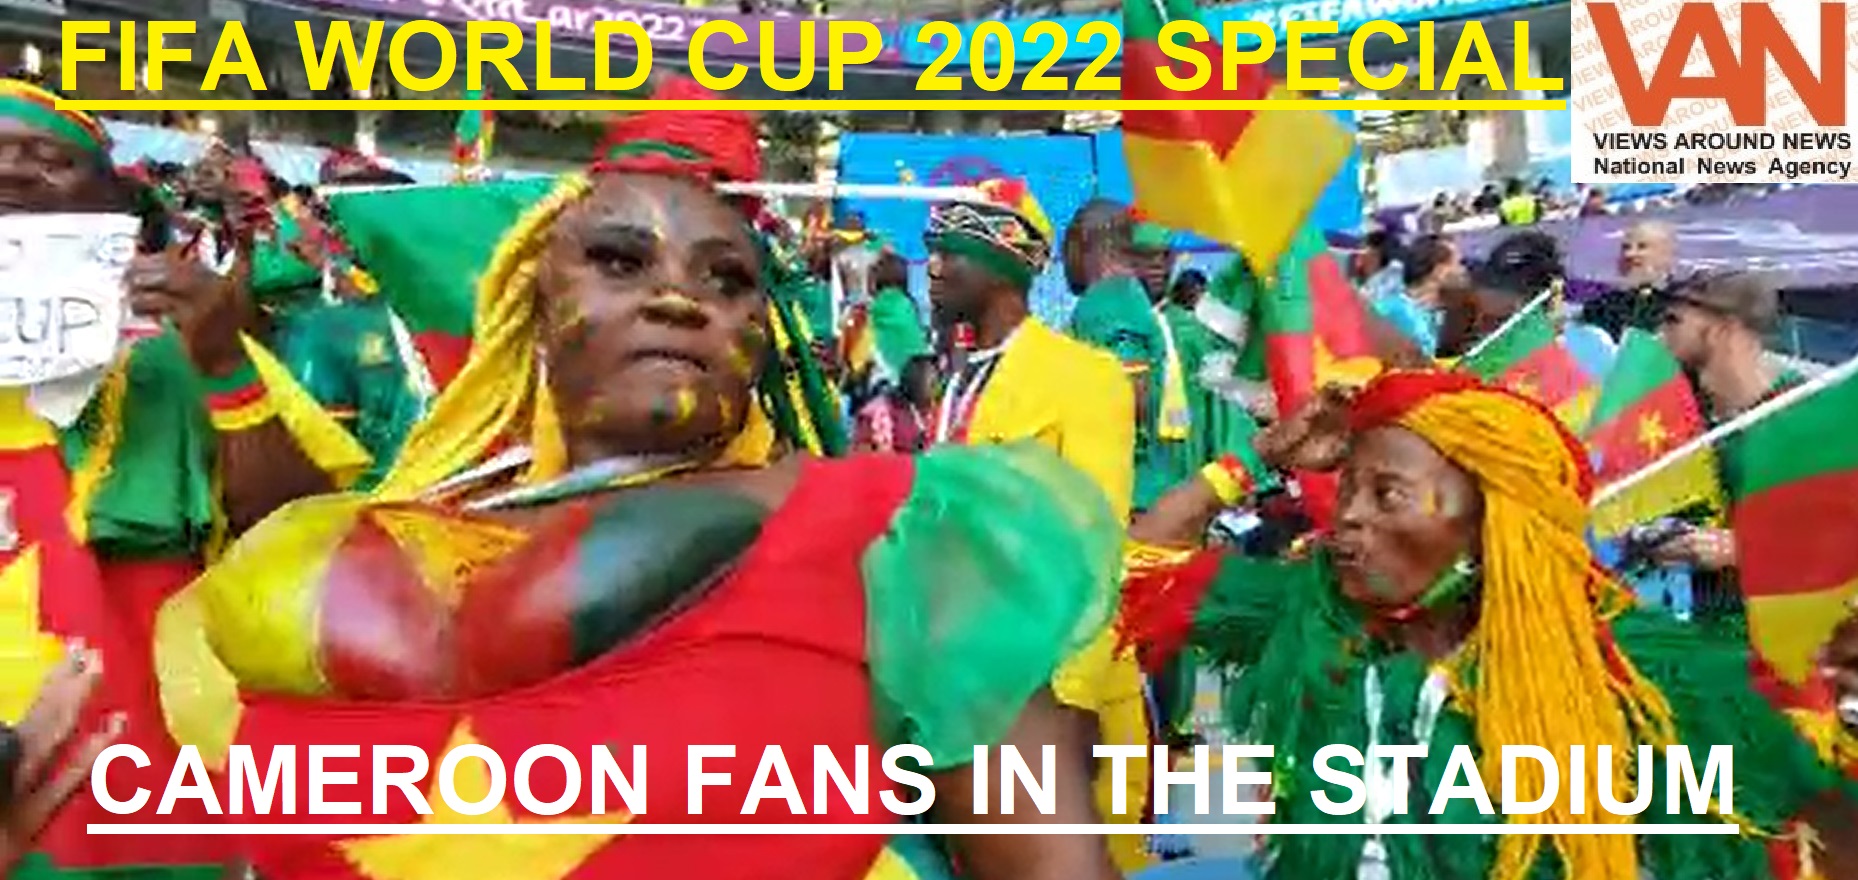 Cameroon Fans were excited in stands during FIFA WC 2022